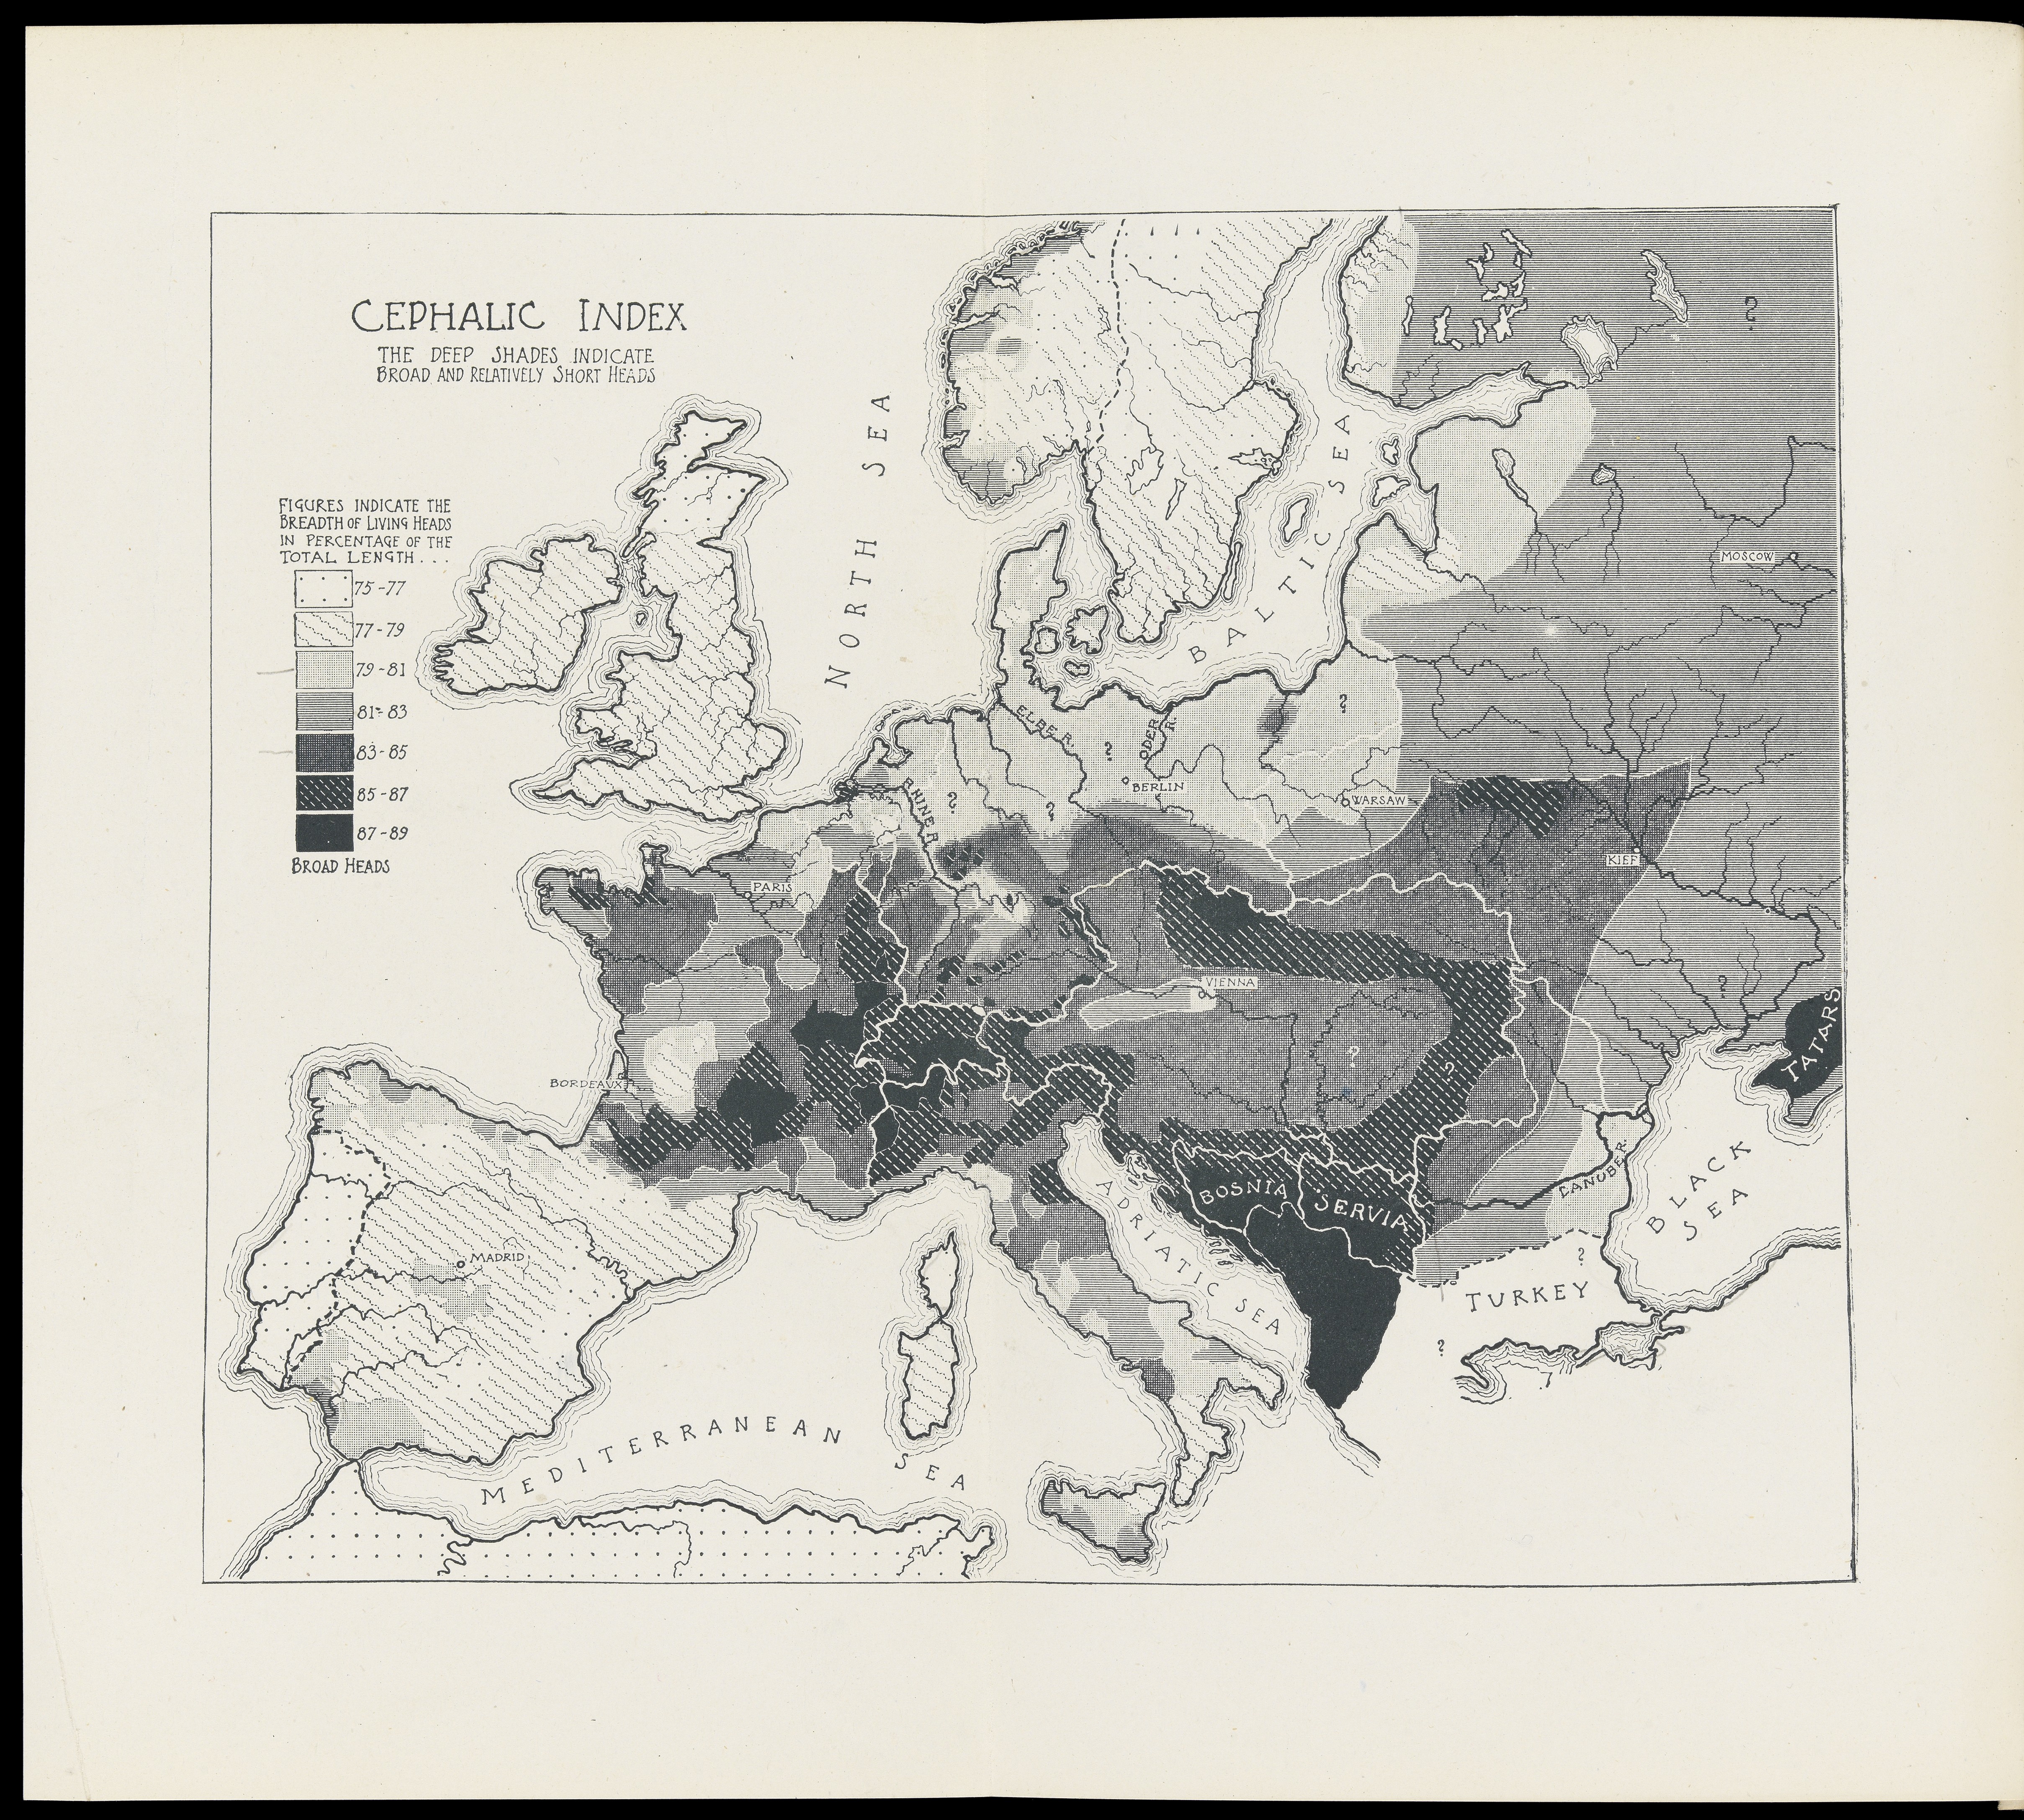 Map_showing_the_Cephalic_Index_of_Europe_Wellcome_L0072218.jpg